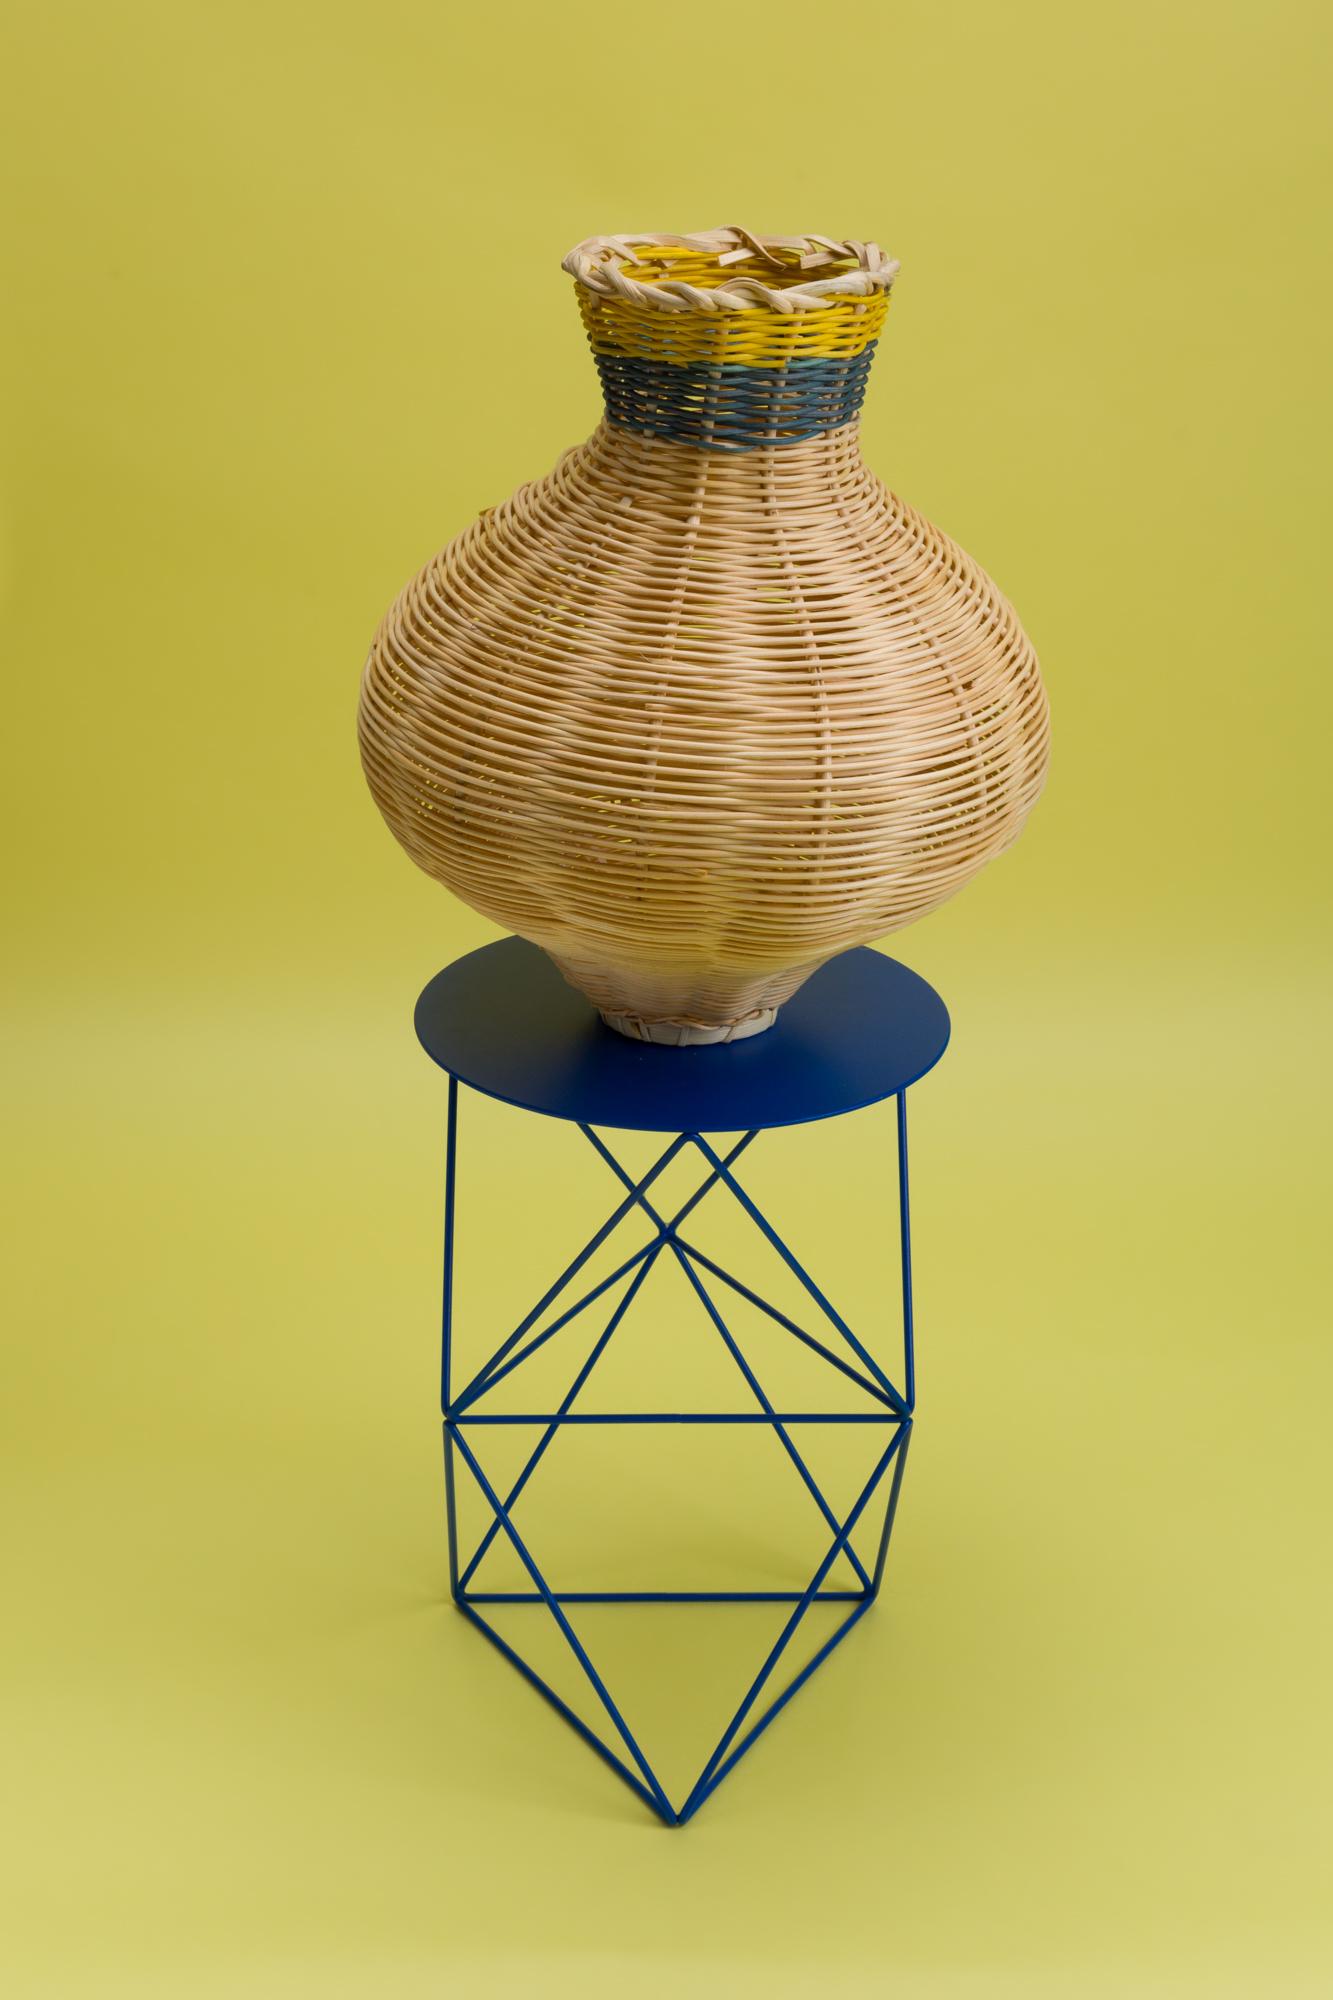 The Amphora Vase Woven in Natural + Denim + Lemon is a one-of-a-kind objet d’art, hand dyed and woven with reed in our Chicago studio. 

Inspired by forms in ancient Greek ceramics, the material language of this vessel brings together the rich